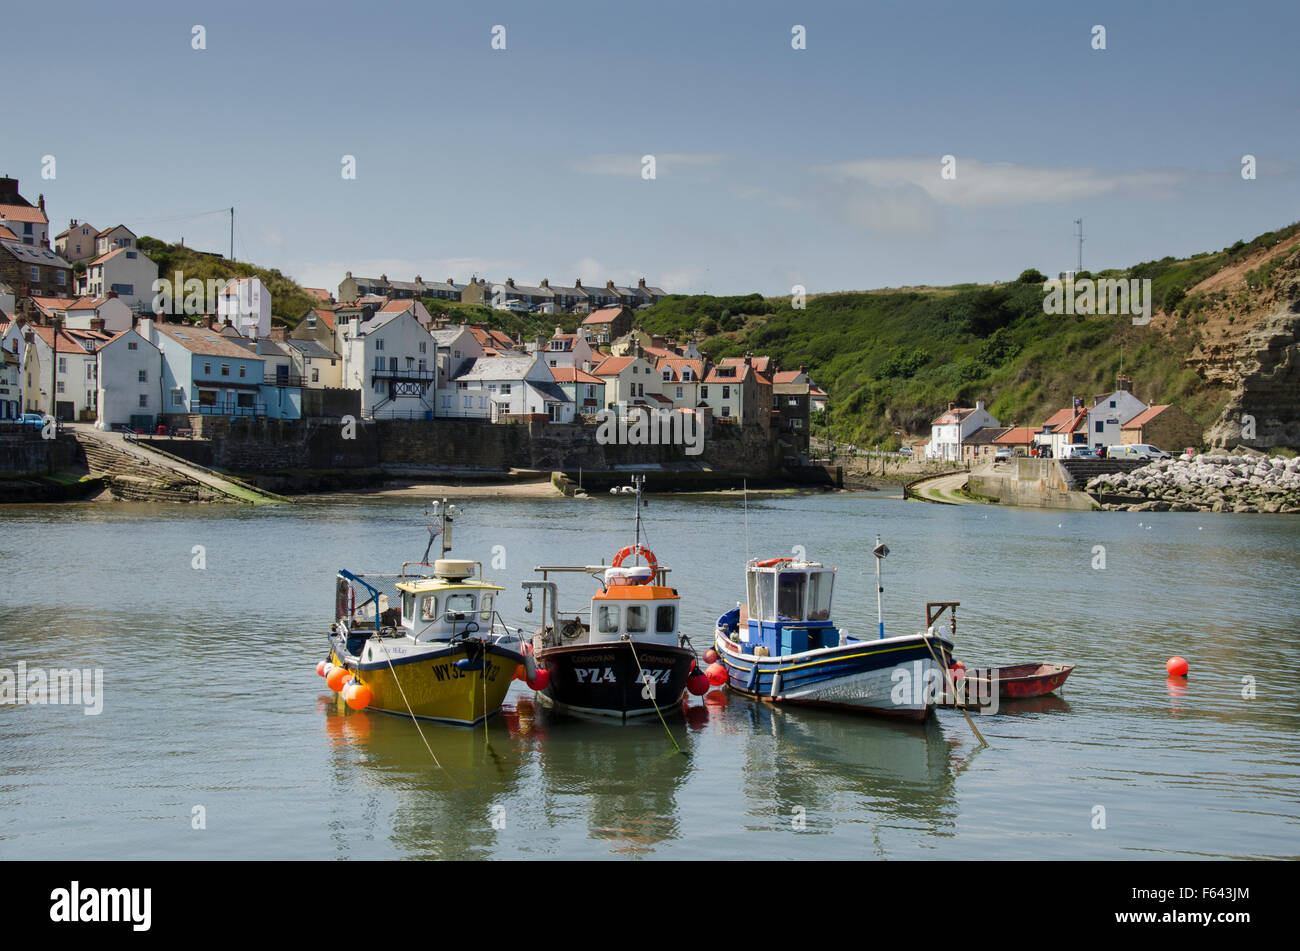 Sunny summer day with blue sky, 3 colourful fishing boats moored in the harbour with the picturesque village of Staithes, North Yorkshire, UK, beyond. Stock Photo